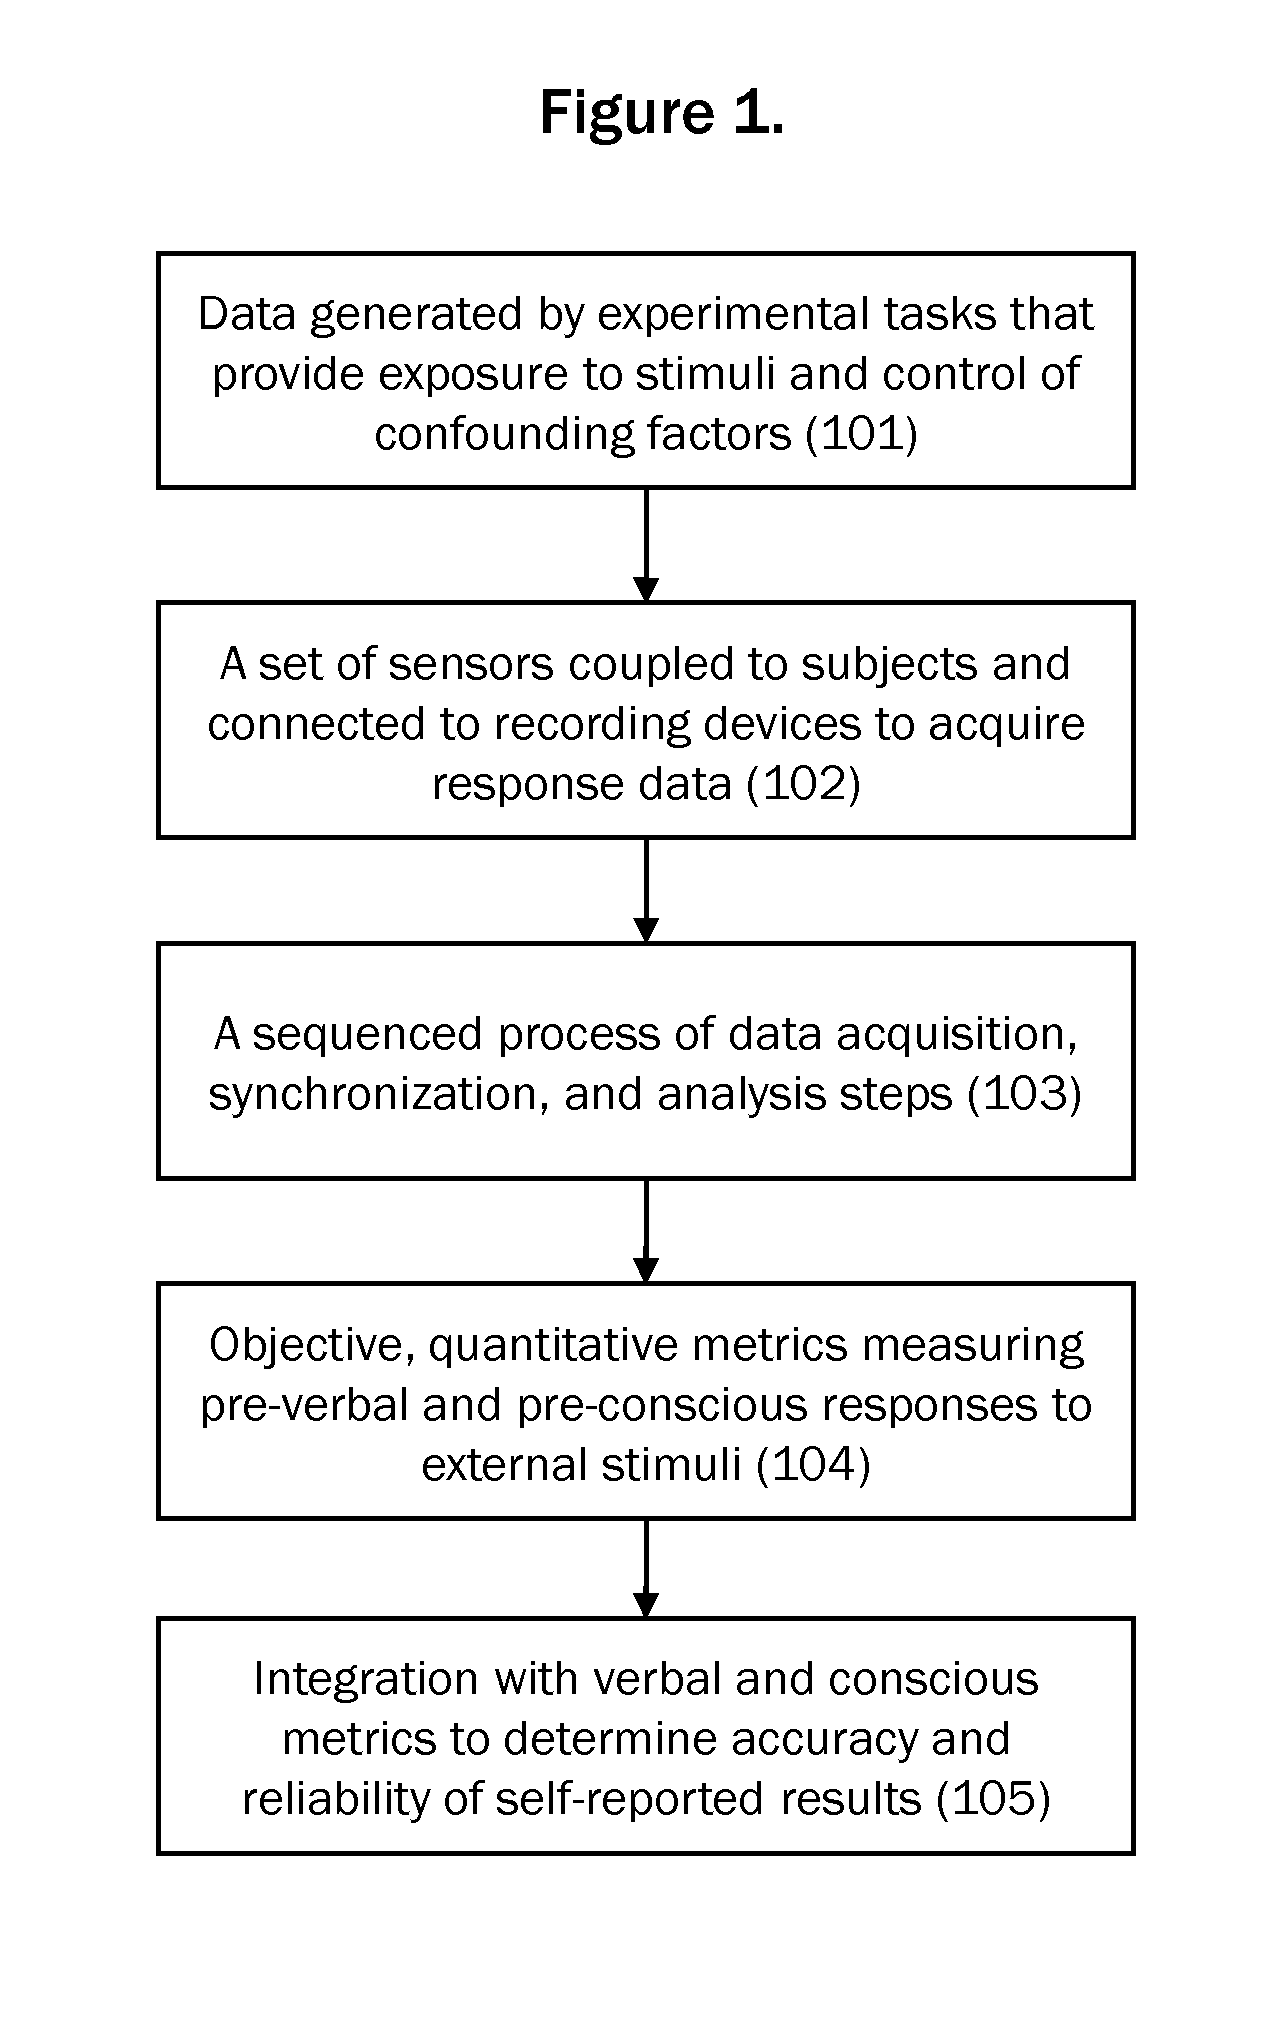 Method and System for Measuring Non-Verbal and Pre-Conscious Responses to External Stimuli